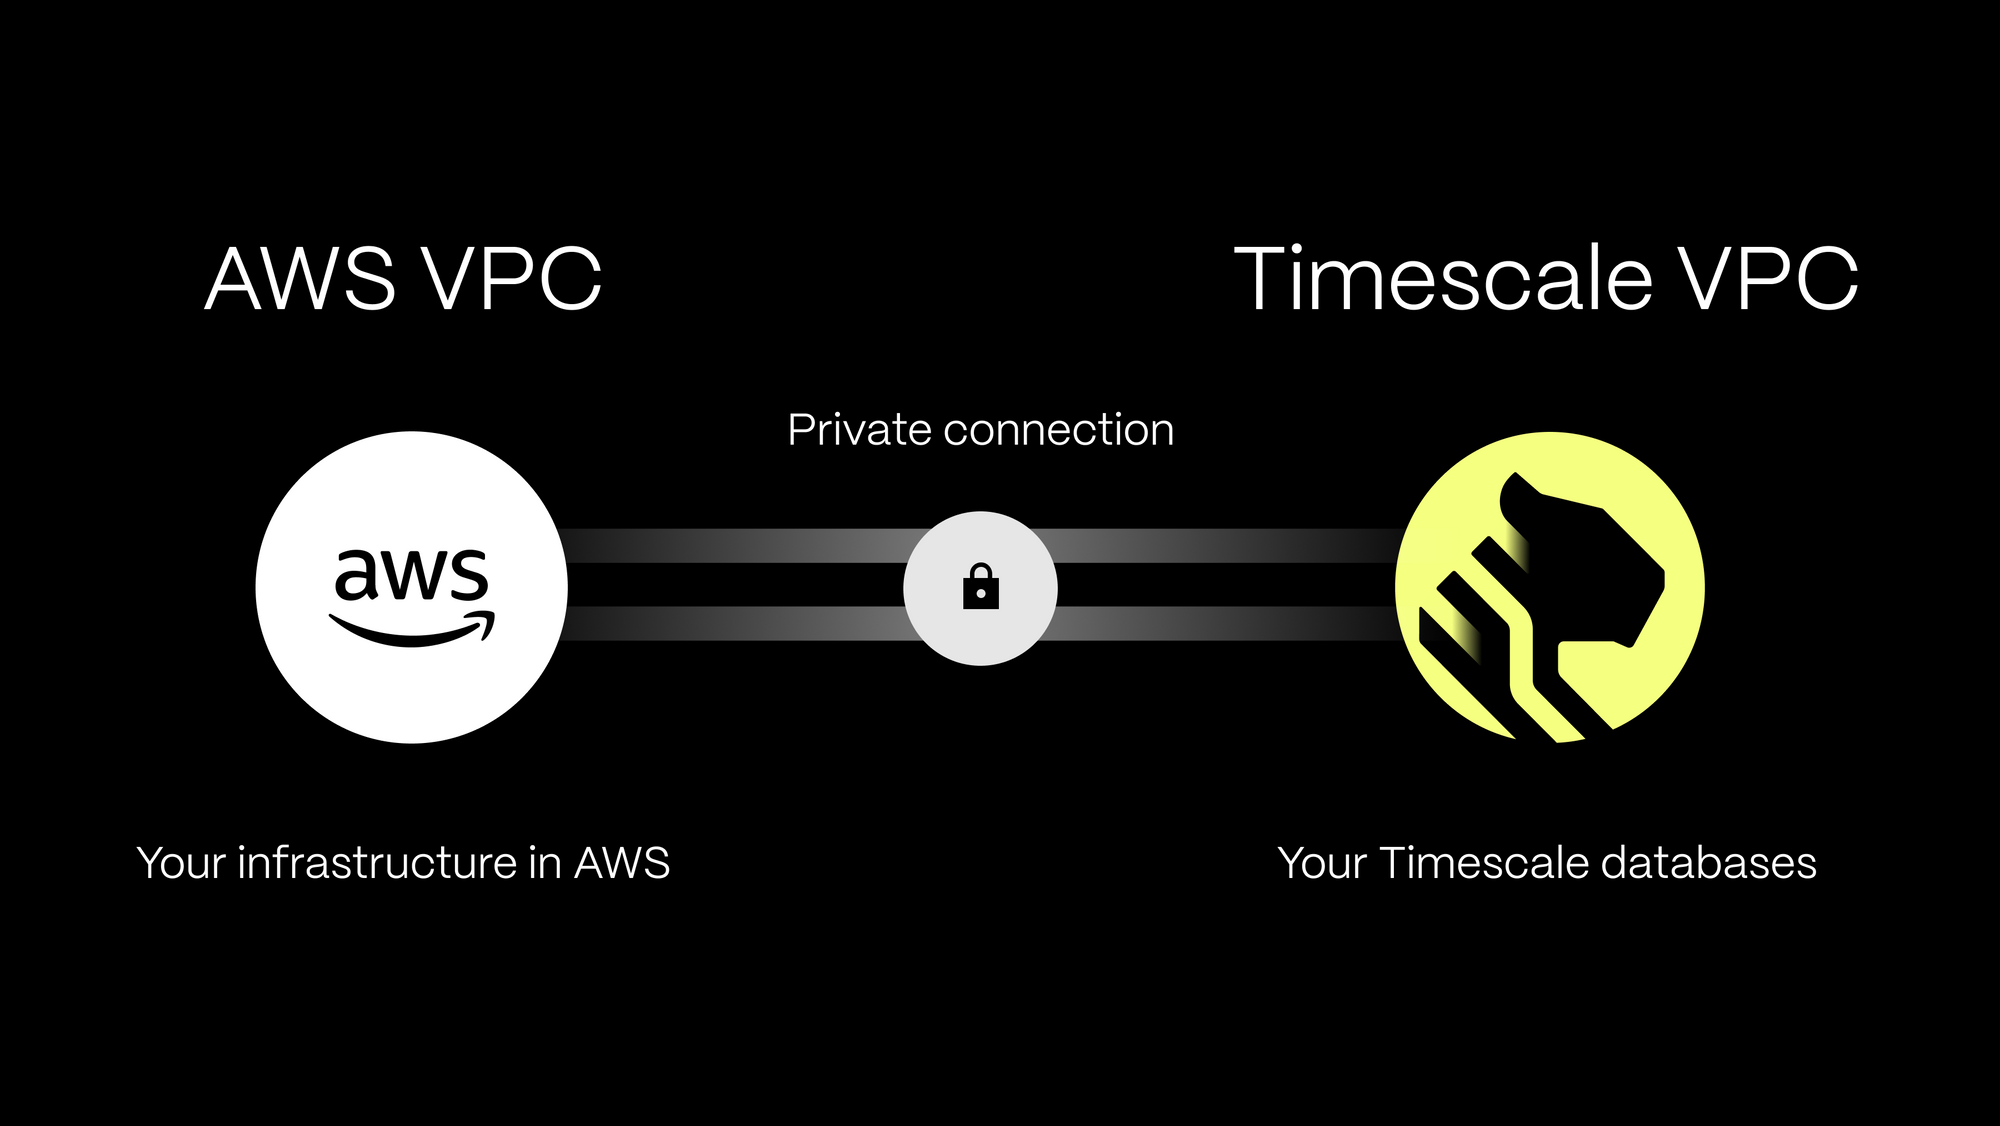 The AWS VPS and the Timescale Cloud VPC linked by a private connection